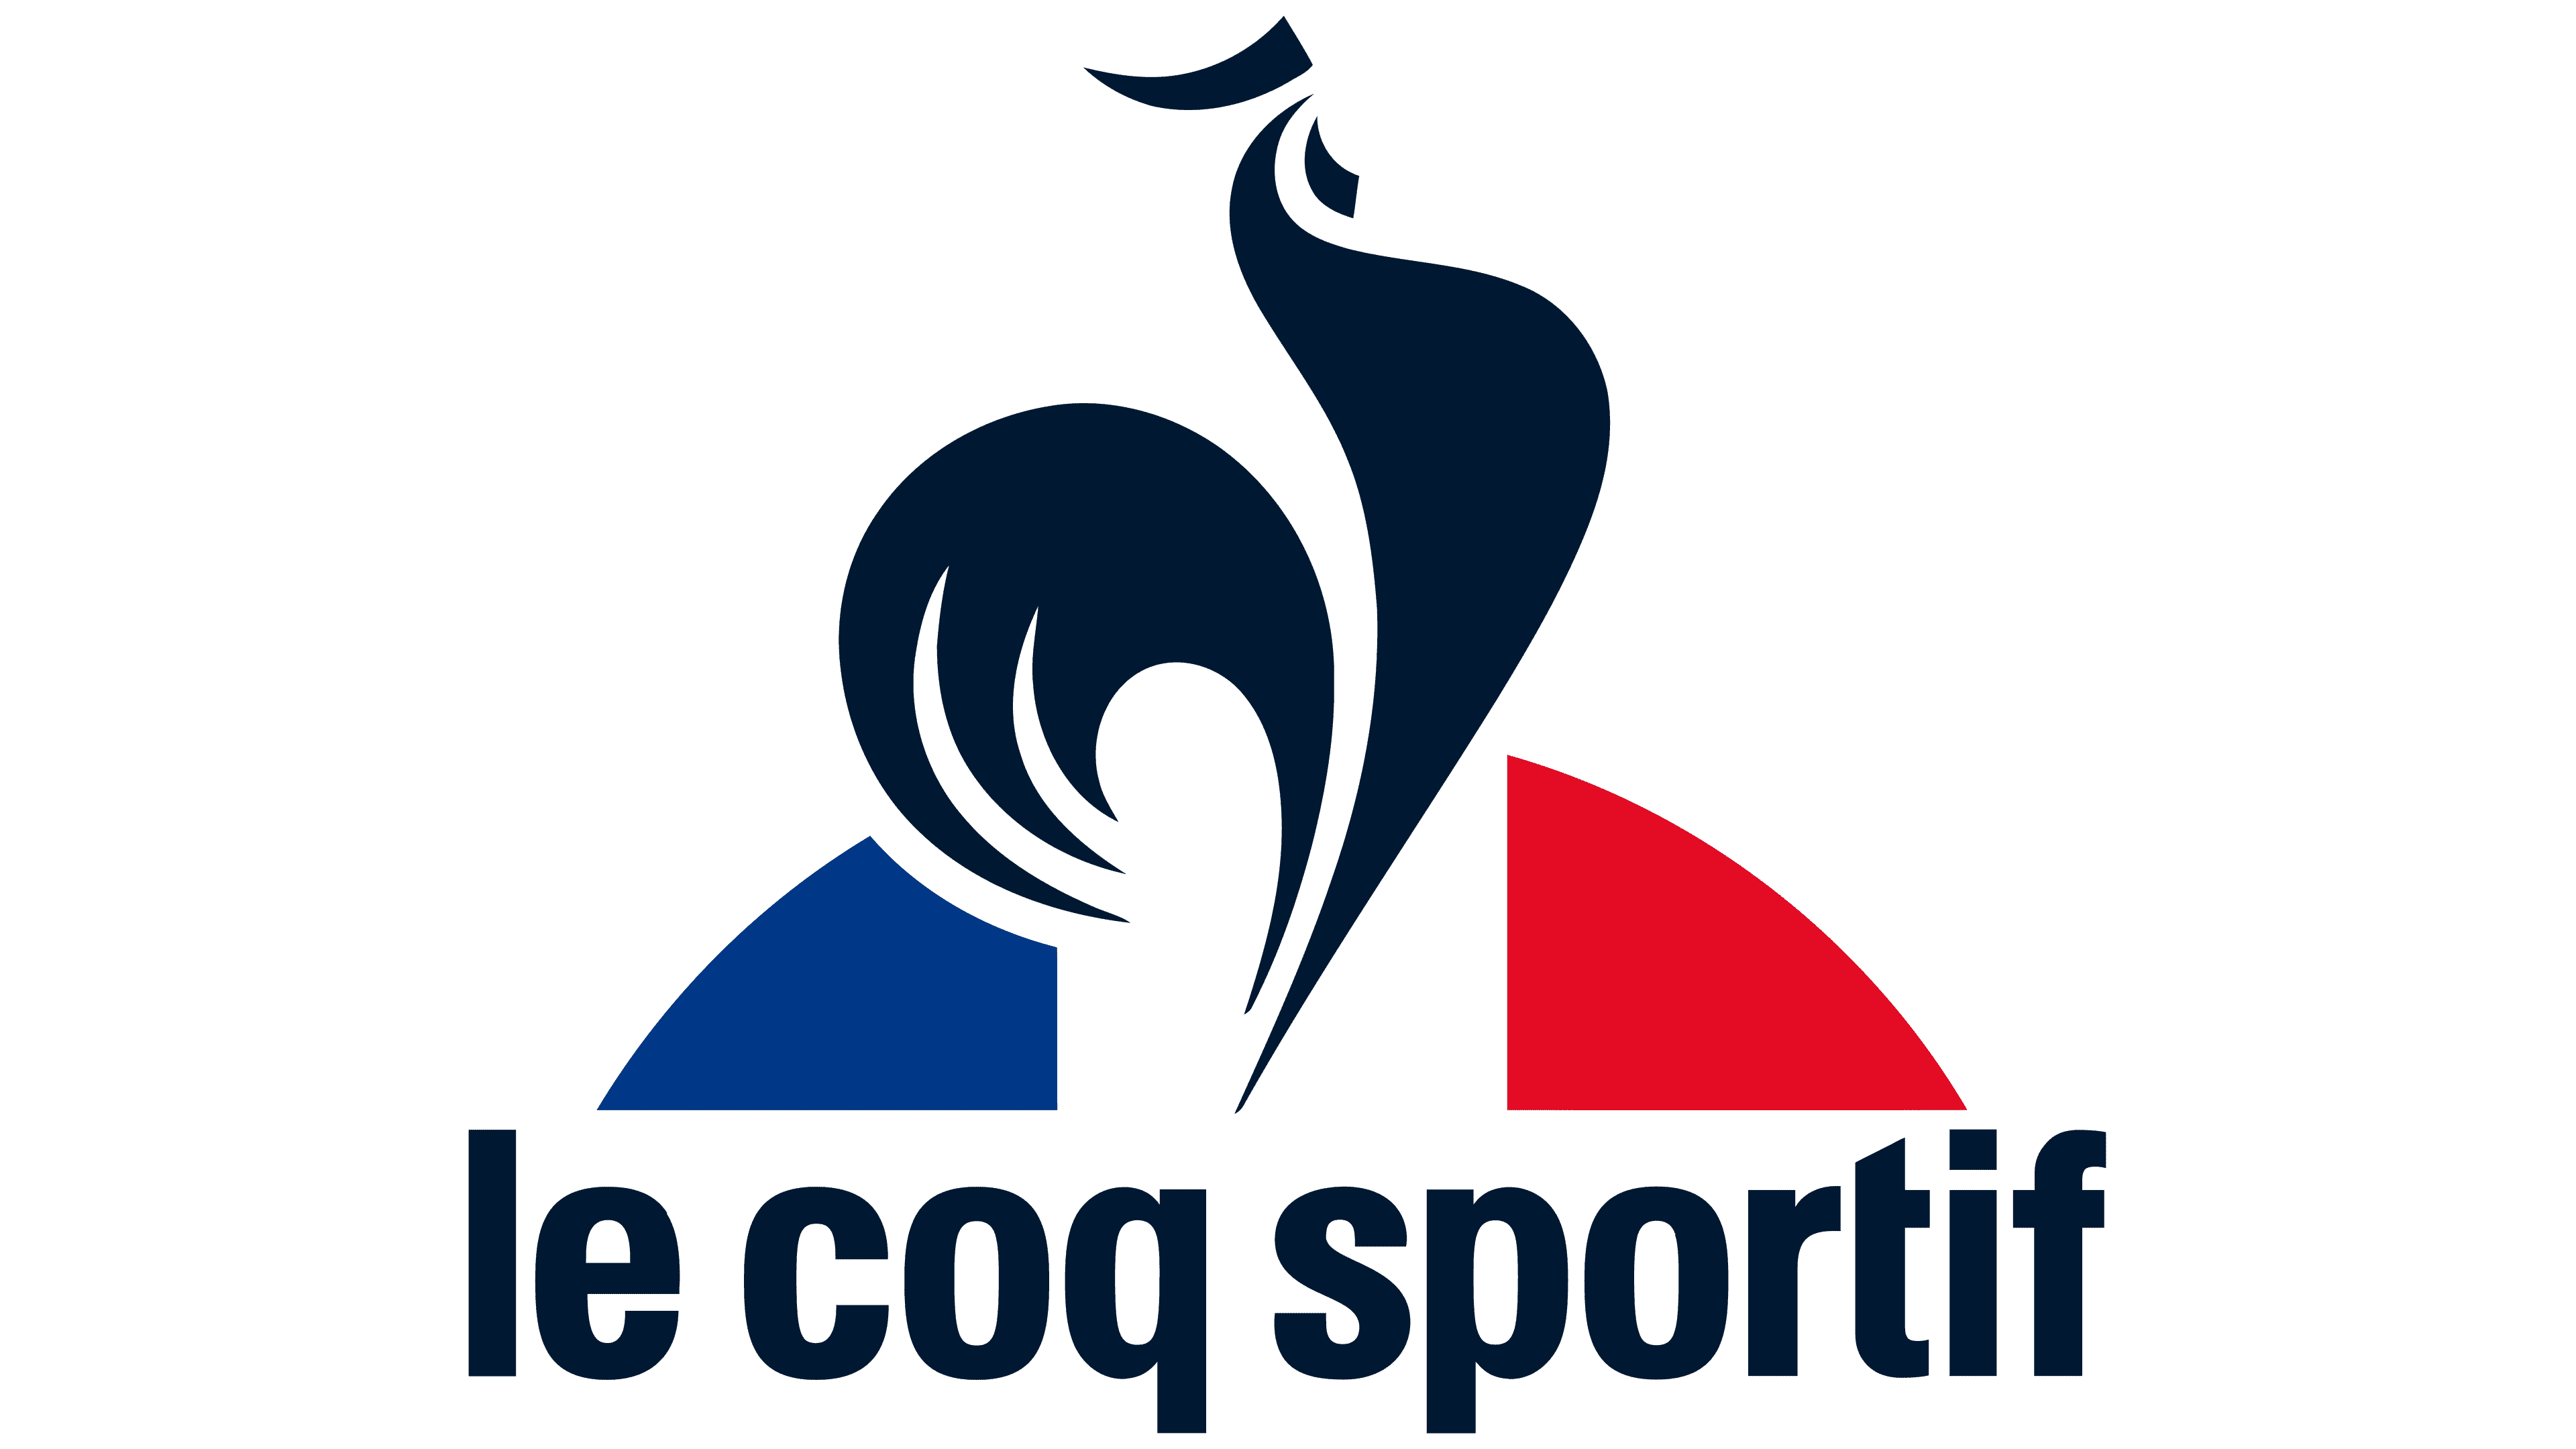 Rusland Isoleren Wens Le Coq Sportif Logo, symbol, meaning, history, PNG, brand